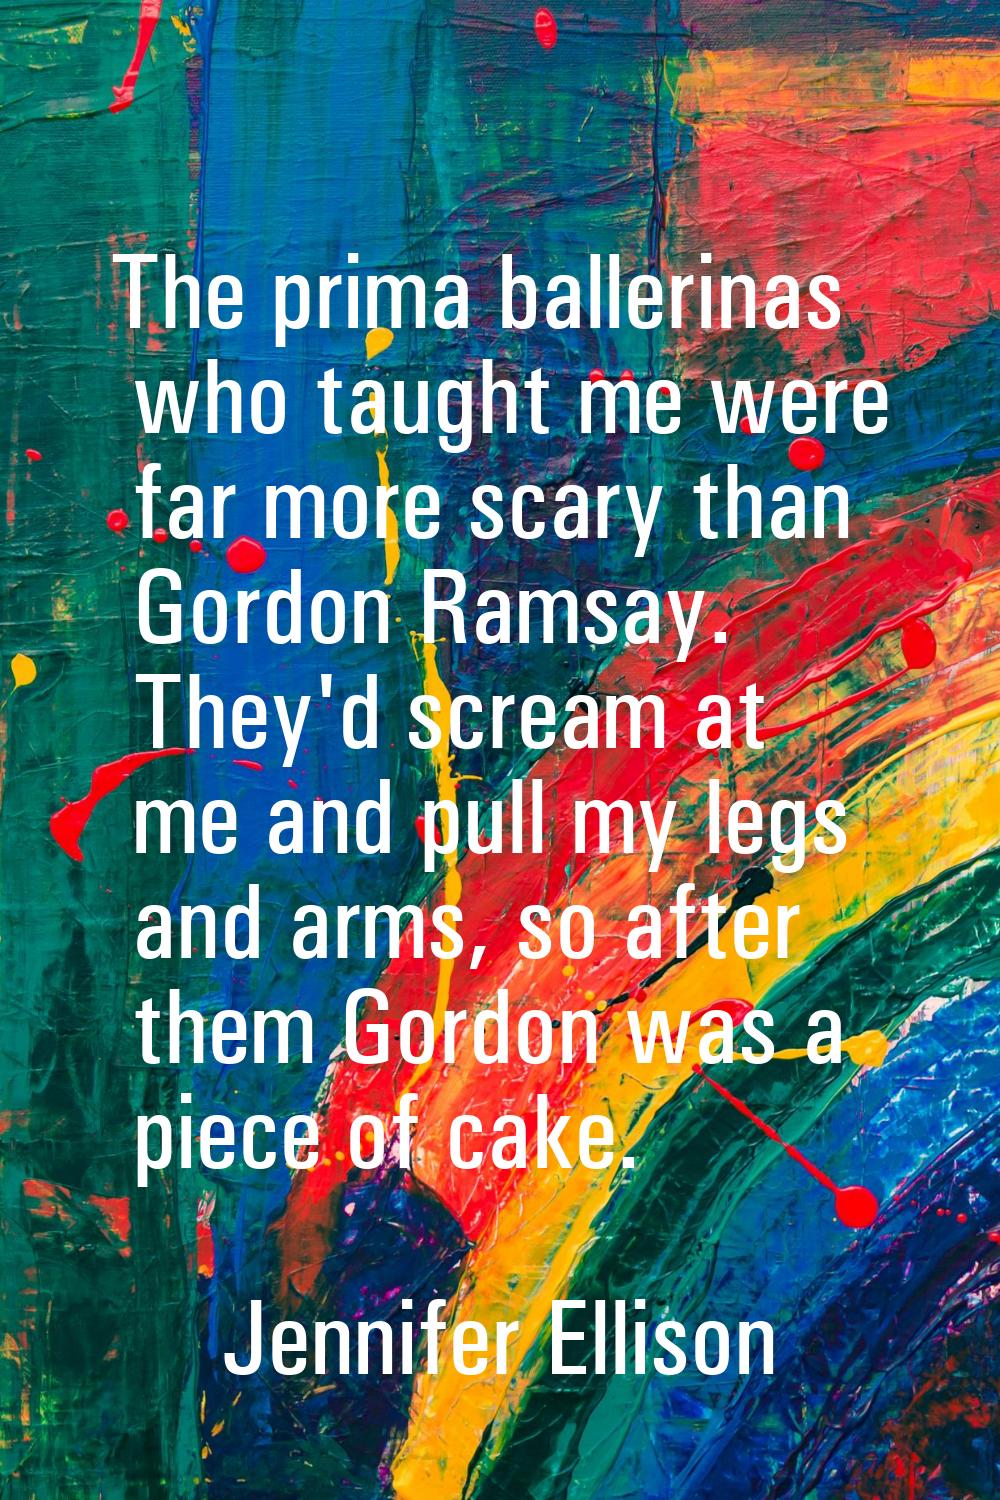 The prima ballerinas who taught me were far more scary than Gordon Ramsay. They'd scream at me and 